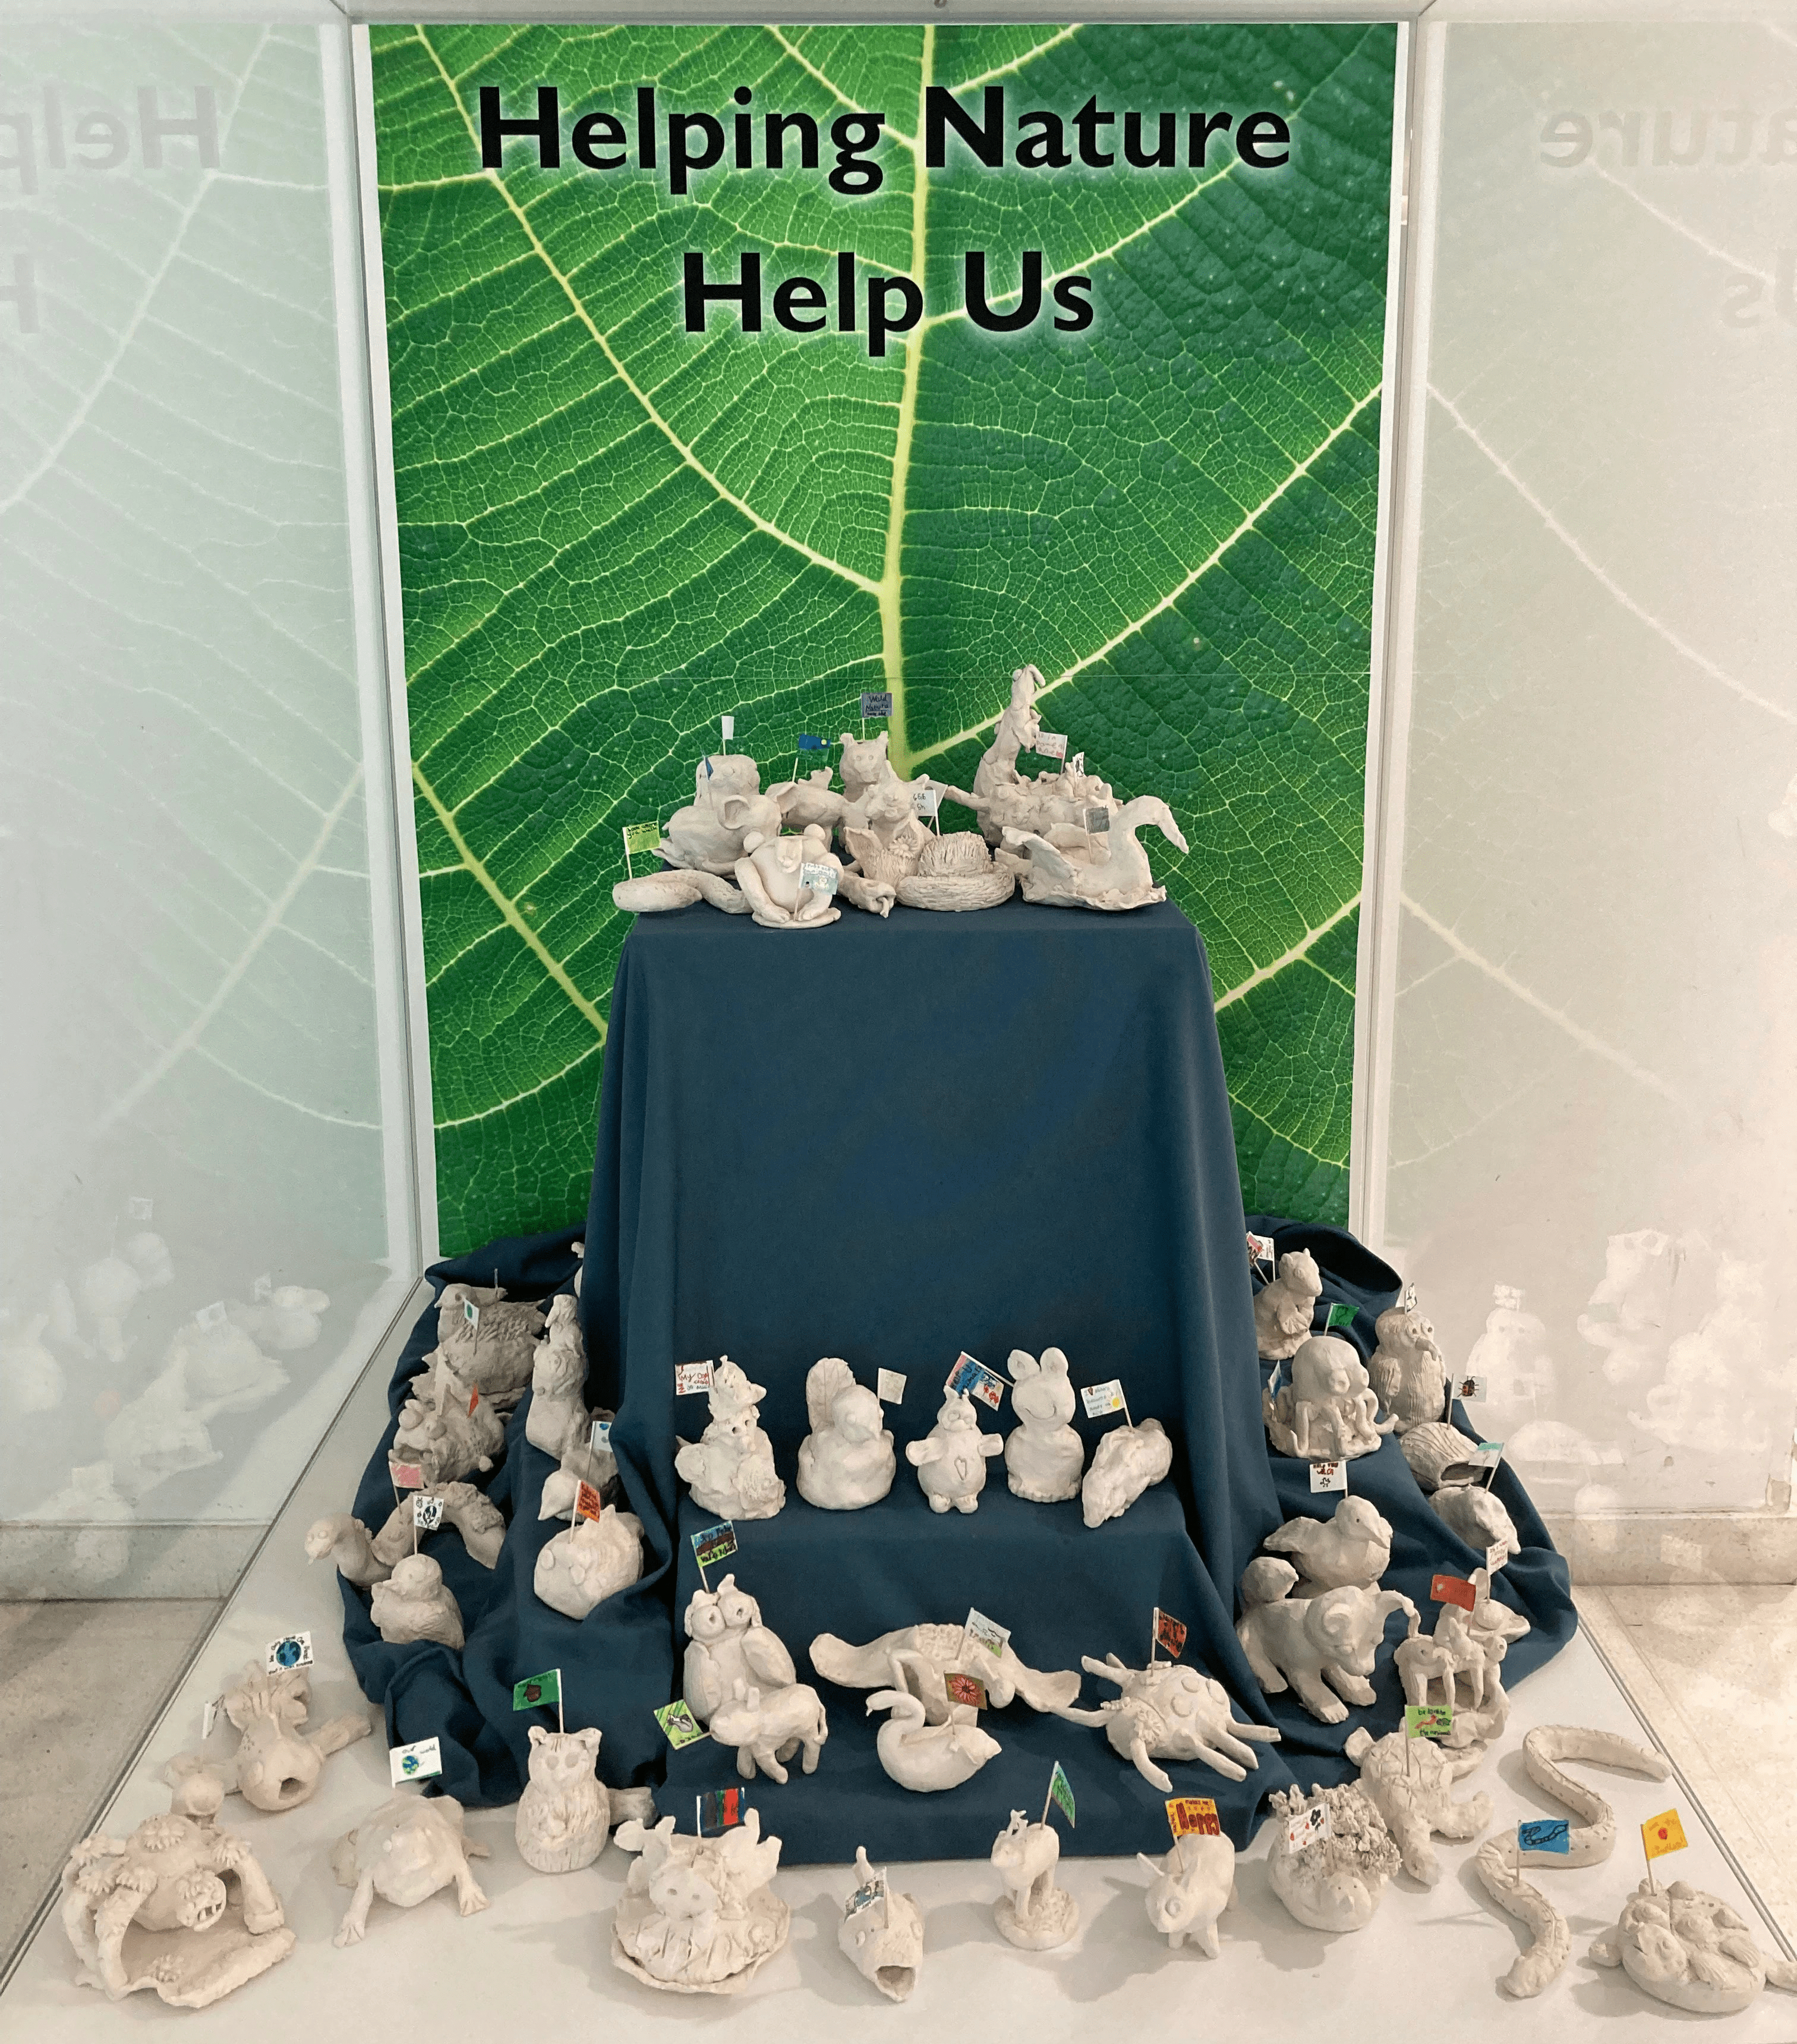 Display of clay sculptures created by school pupils in front of a green close up image of a leaf